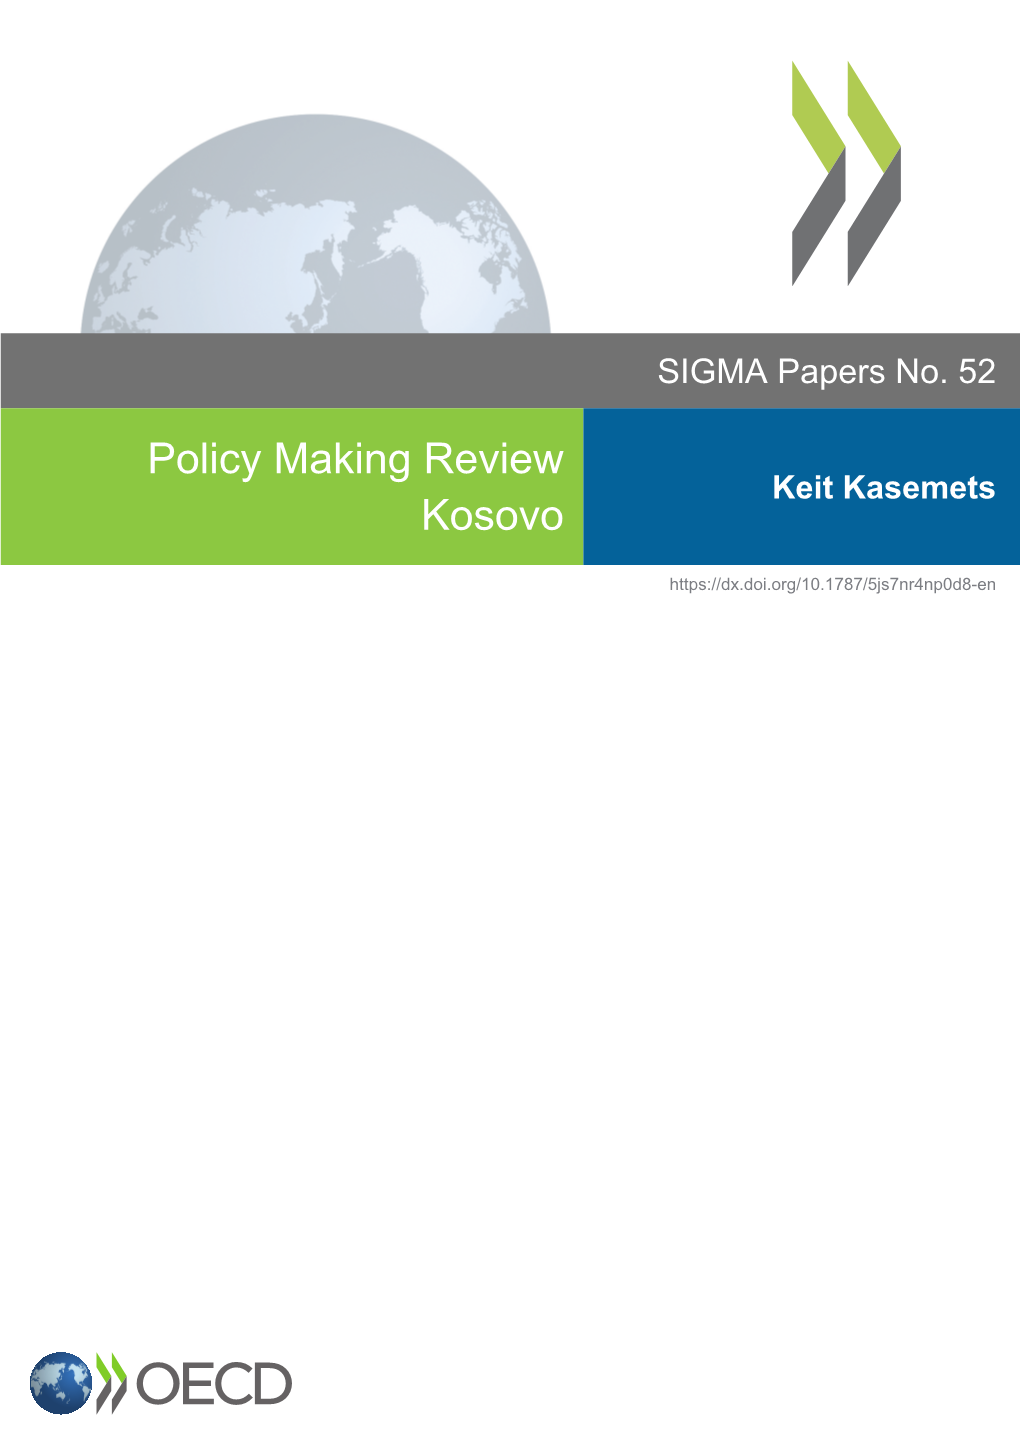 Policy Making Review Kosovo*